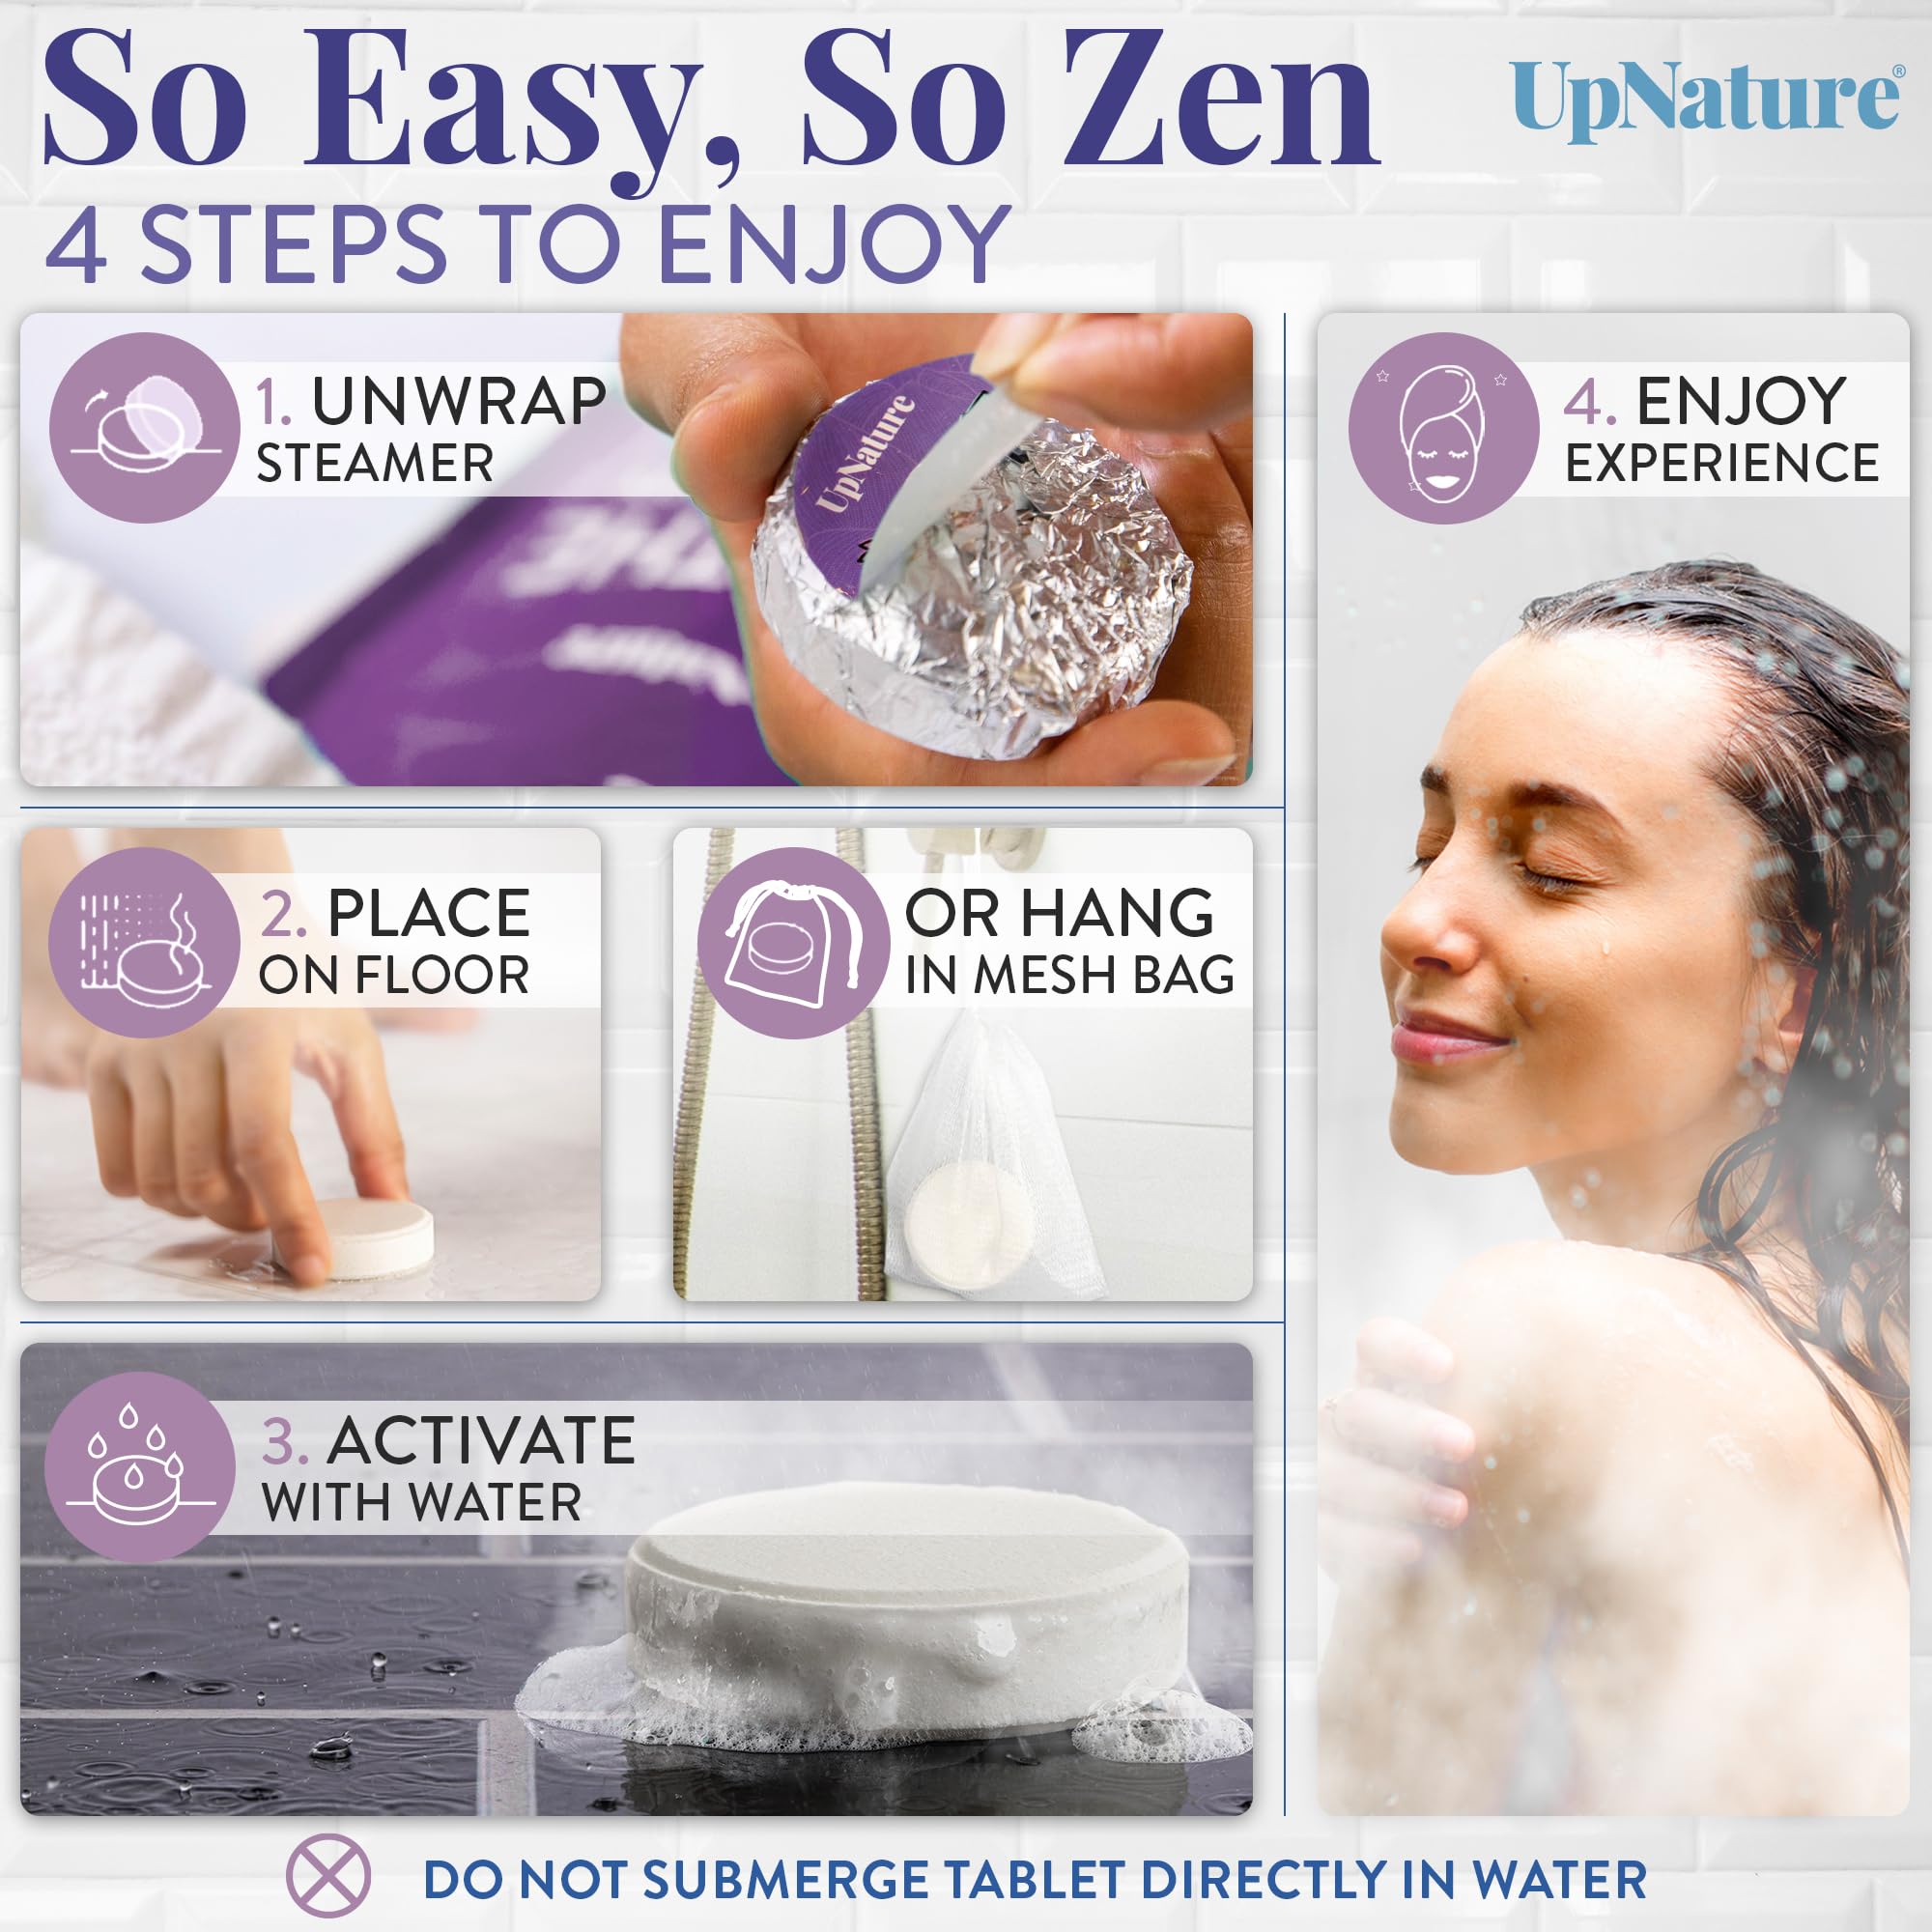 UpNature Shower Steamers Aromatherapy, Calm 12pcs - Lavender Shower Steamer Restore Relaxation, Essential Oil Lavender Shower Bath Bombs Tablets for Stress Relief, Self Care Gifts for Women & Men